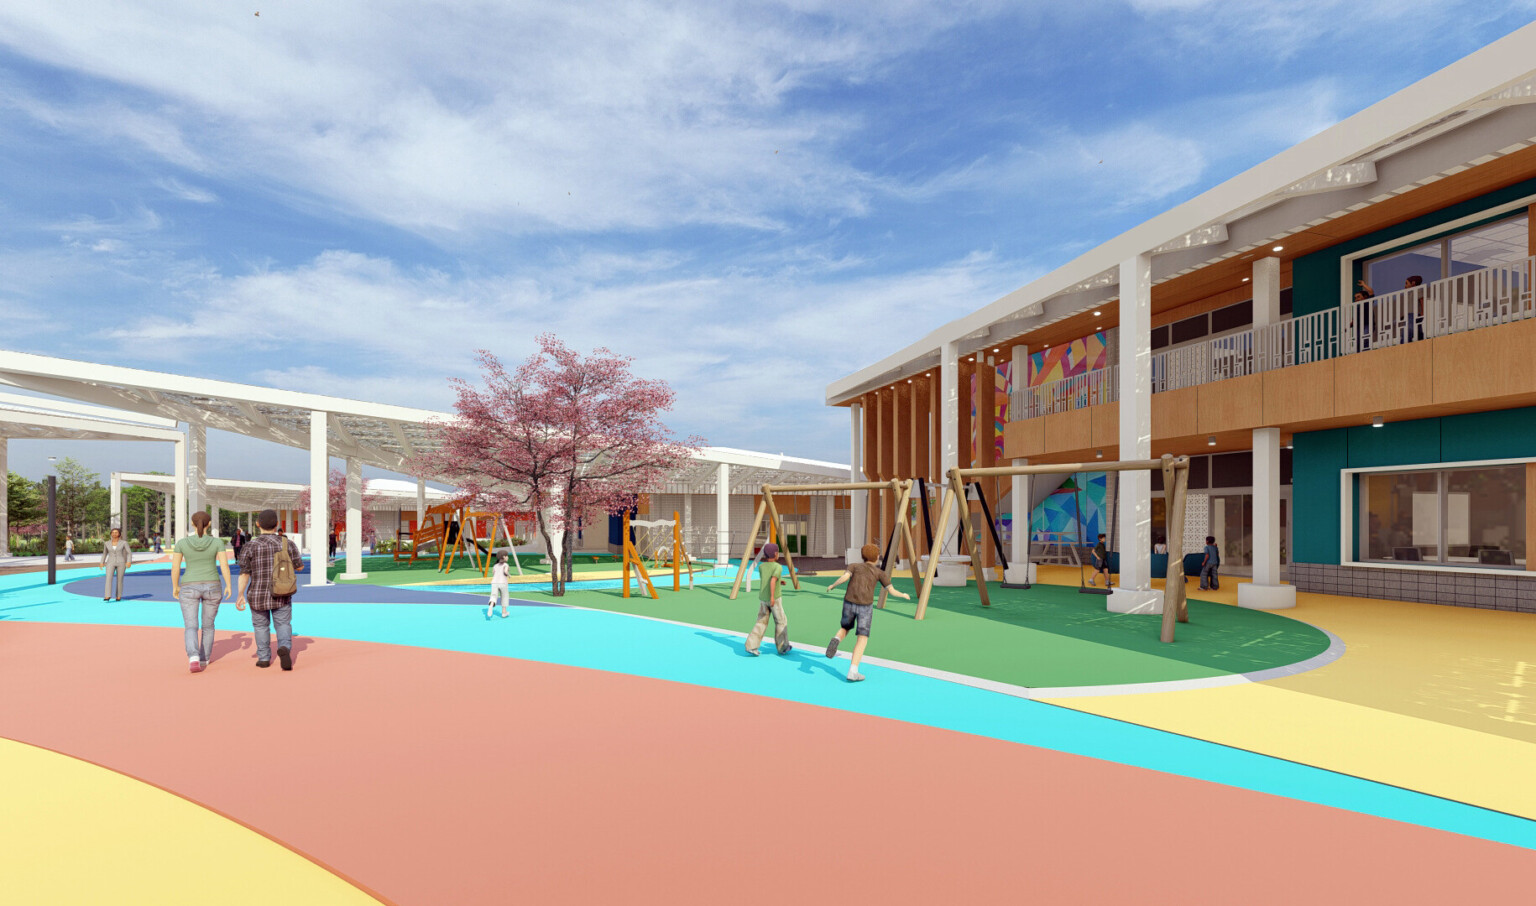 Multicolor stripes on path with swings to right in front of 2 story building with balcony and white columns. Sunscreen left